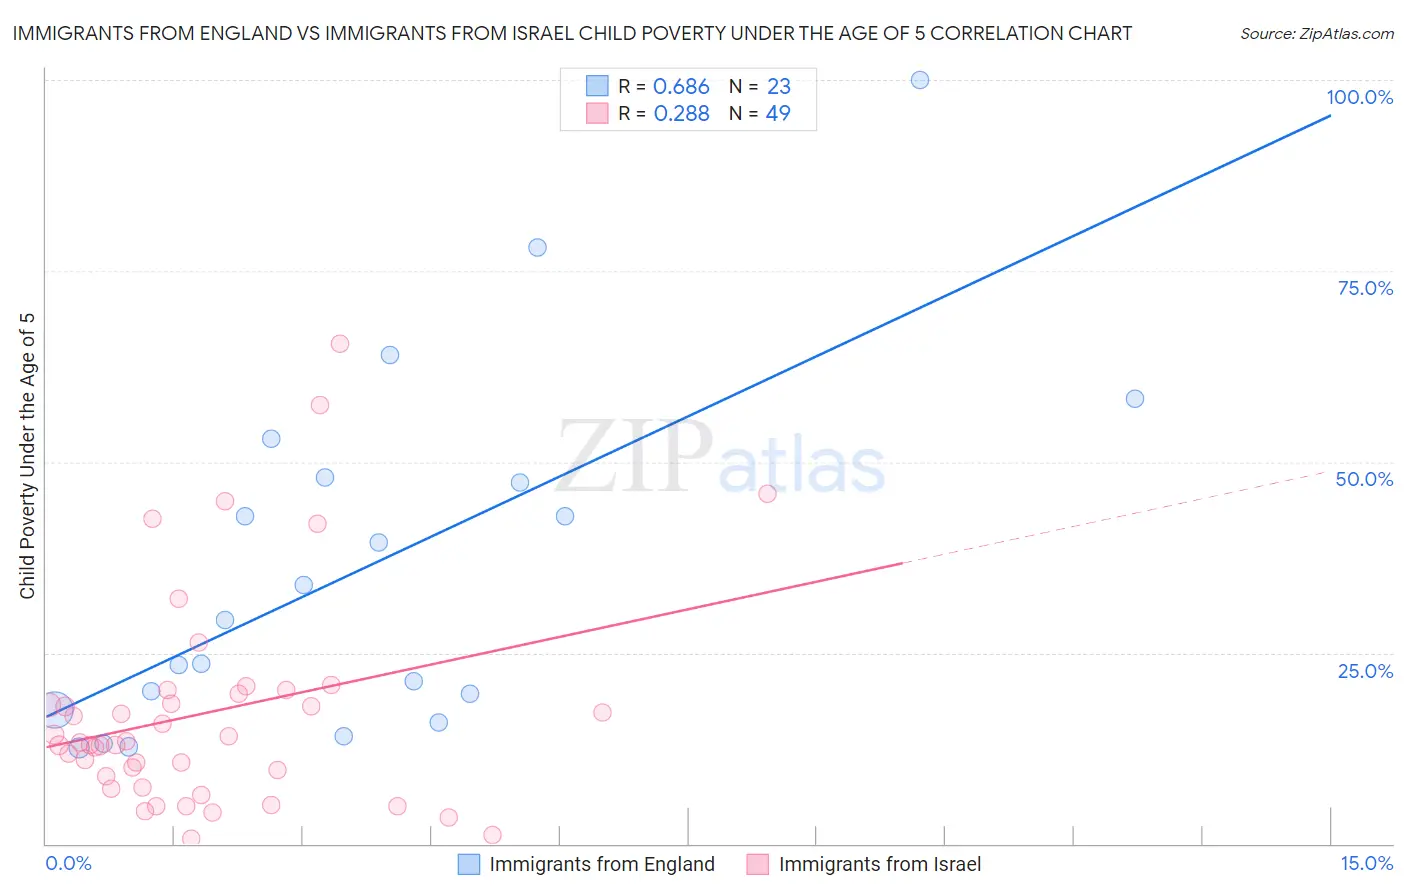 Immigrants from England vs Immigrants from Israel Child Poverty Under the Age of 5